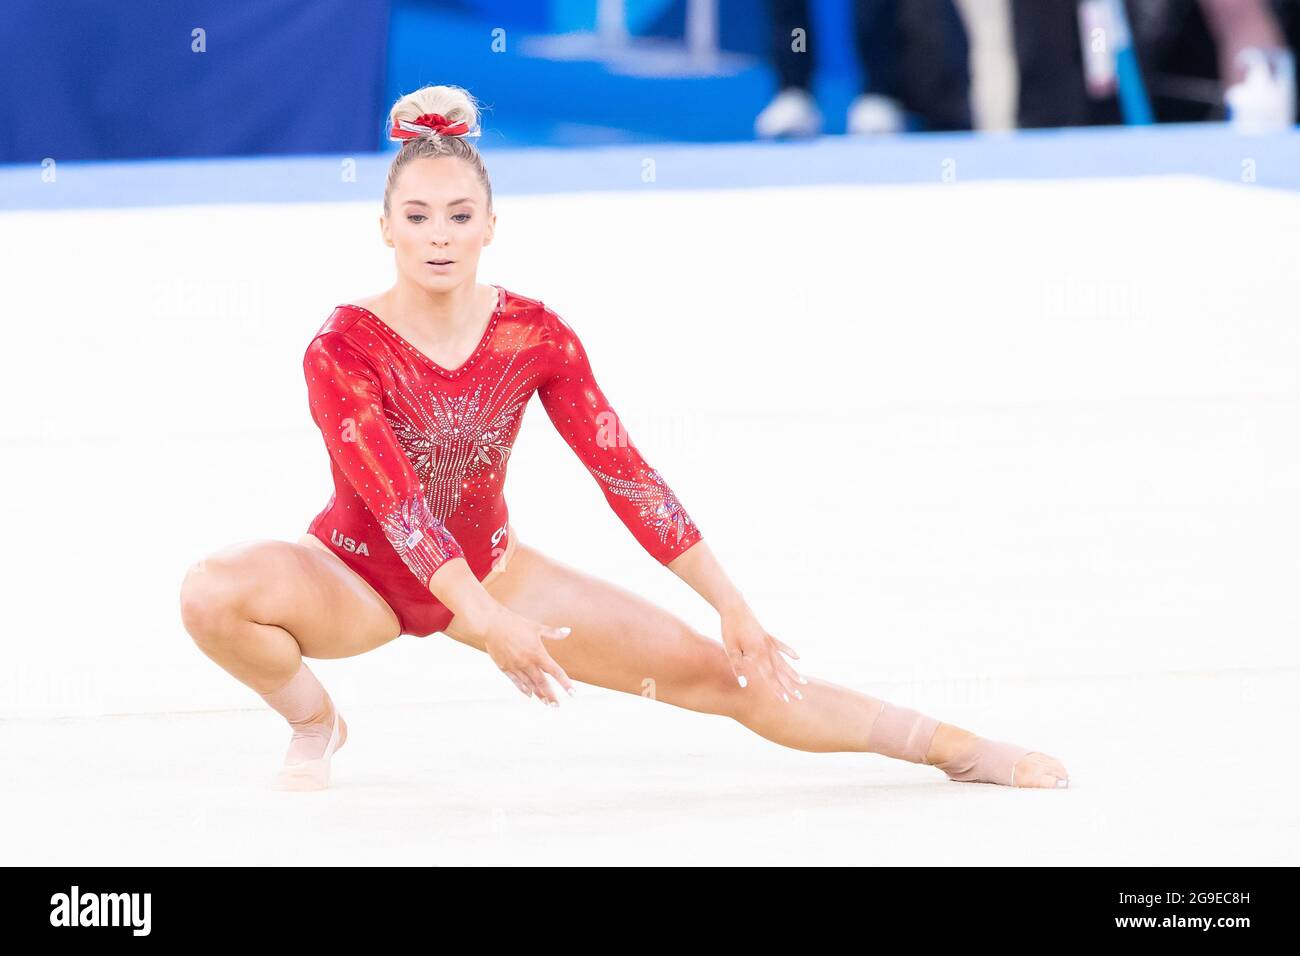 Tokyo, Japan. 25th July, 2021. Mykayla Skinner of United States (397) perform floor routine during the Tokyo 2020 Olympic Games Women's Qualification at the Ariake Gymnastics Centre in Tokyo, Japan. Daniel Lea/CSM}. Credit: csm/Alamy Live News Stock Photo